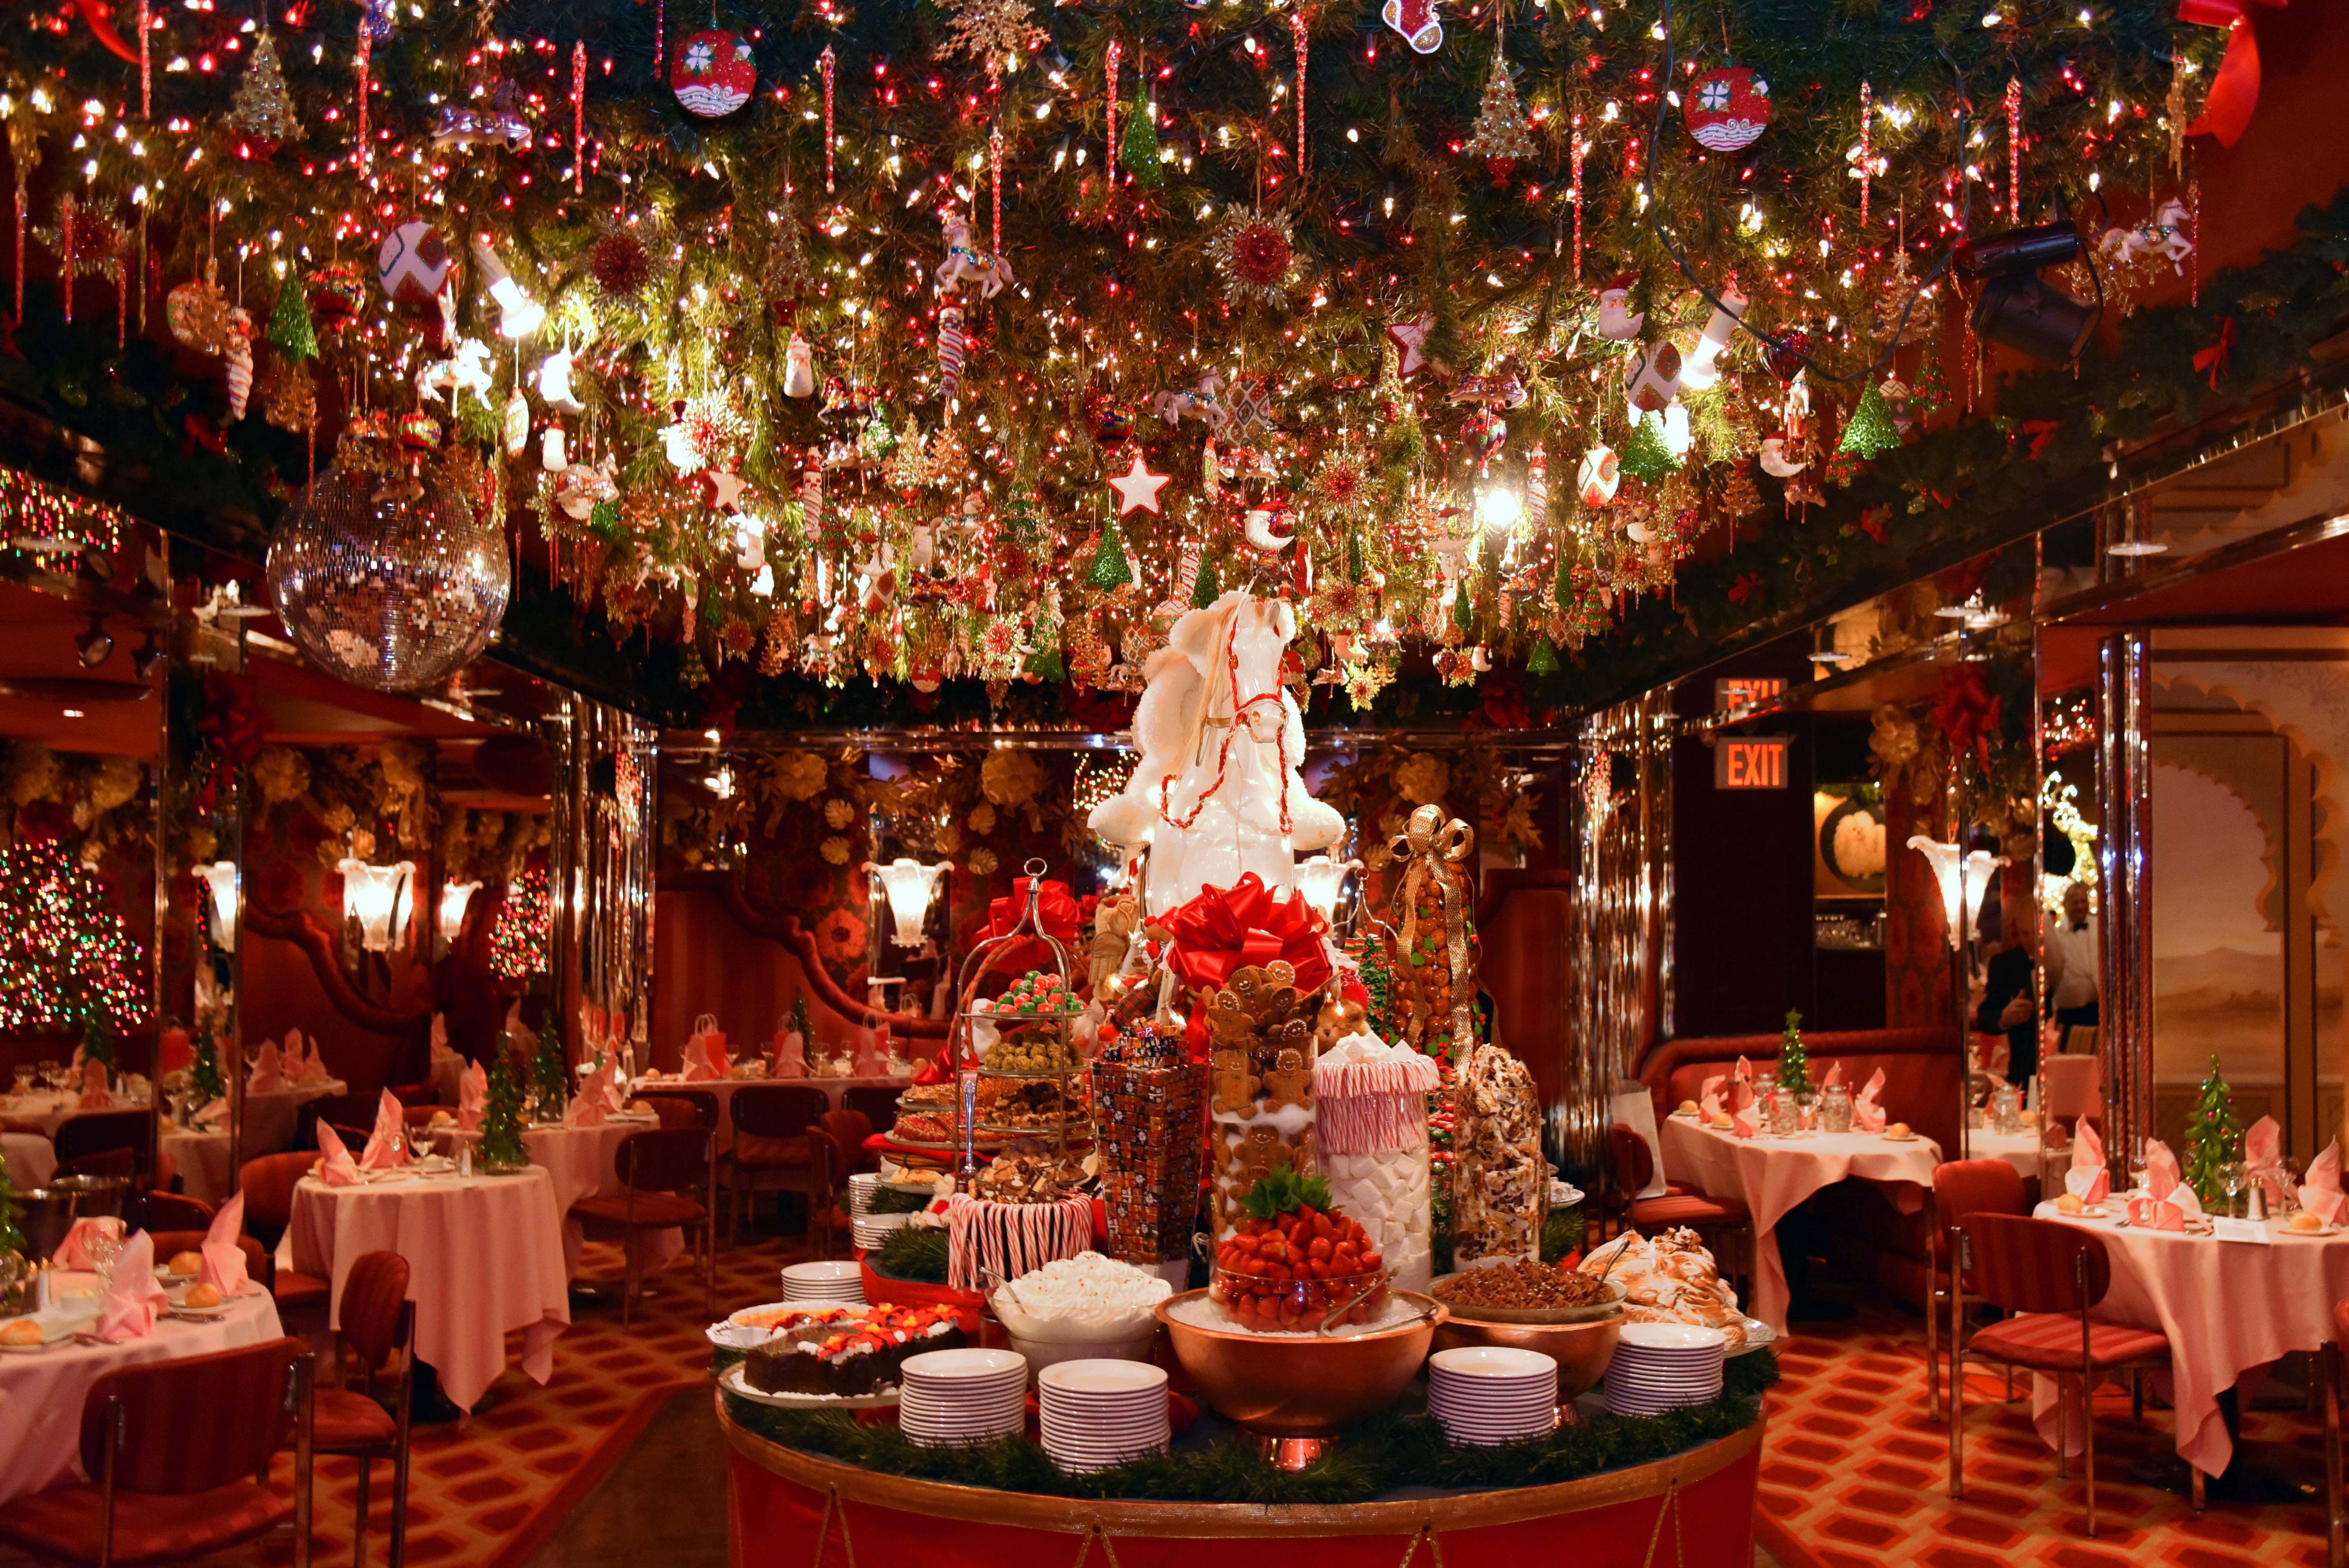 5 Spots With The Most Over-the-Top Holiday Décor in NYC